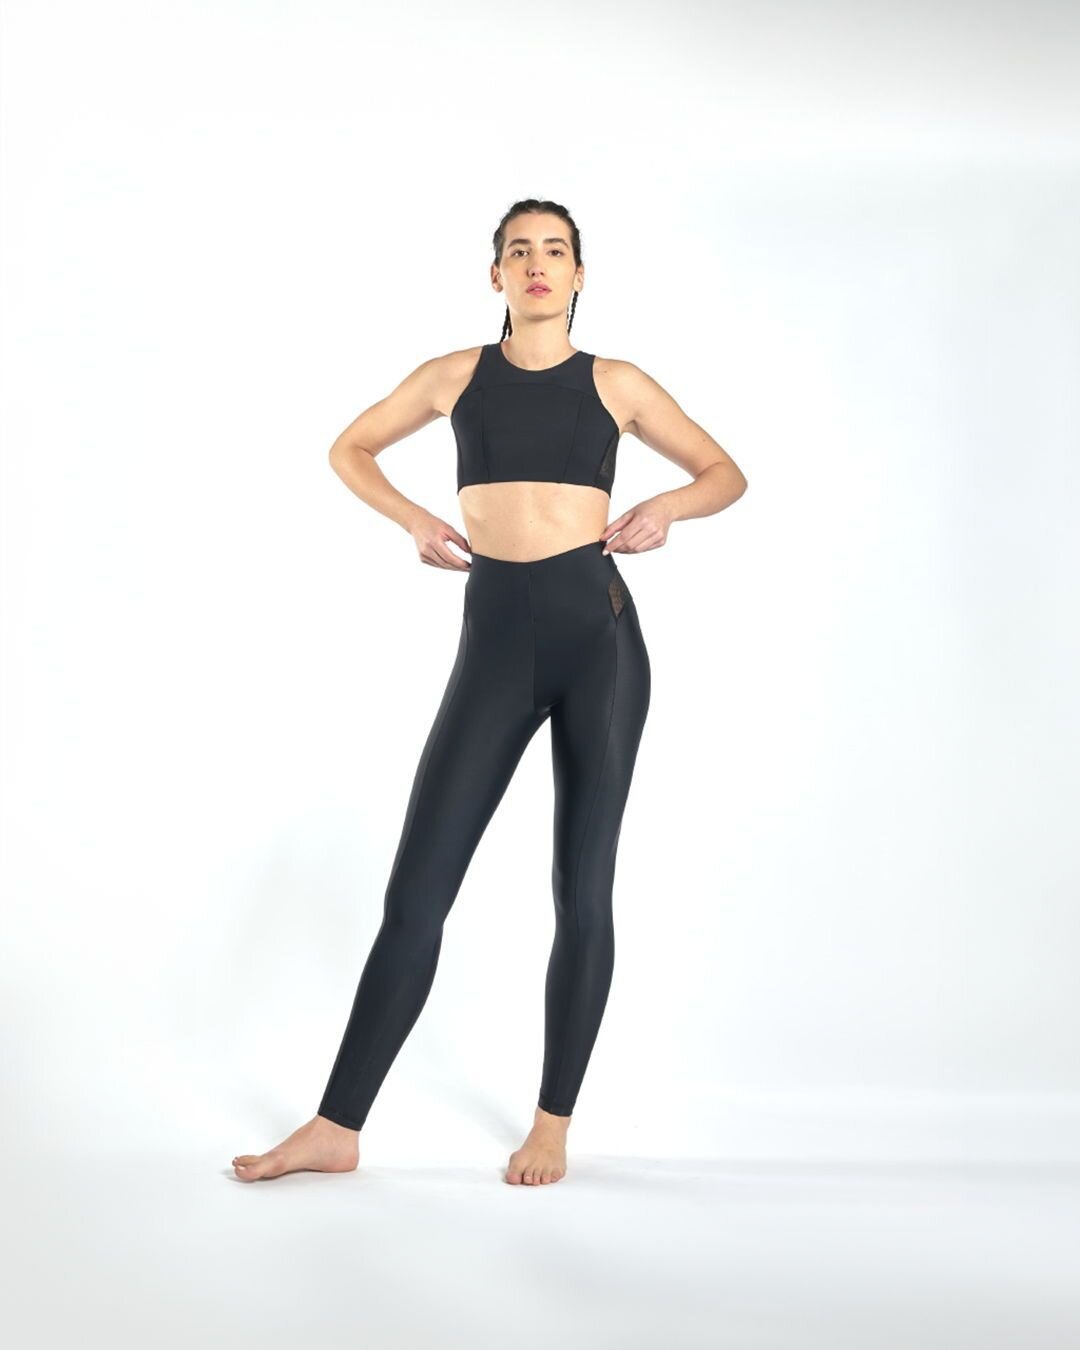 CAROLINA wears the Empowering Top + the Boundless Leggings in black. Discover all the available shades of our most loved set on UNDSWIM.COM. #undswim #sustainablefashion #lifewear #undverse #sportystyle #activewear